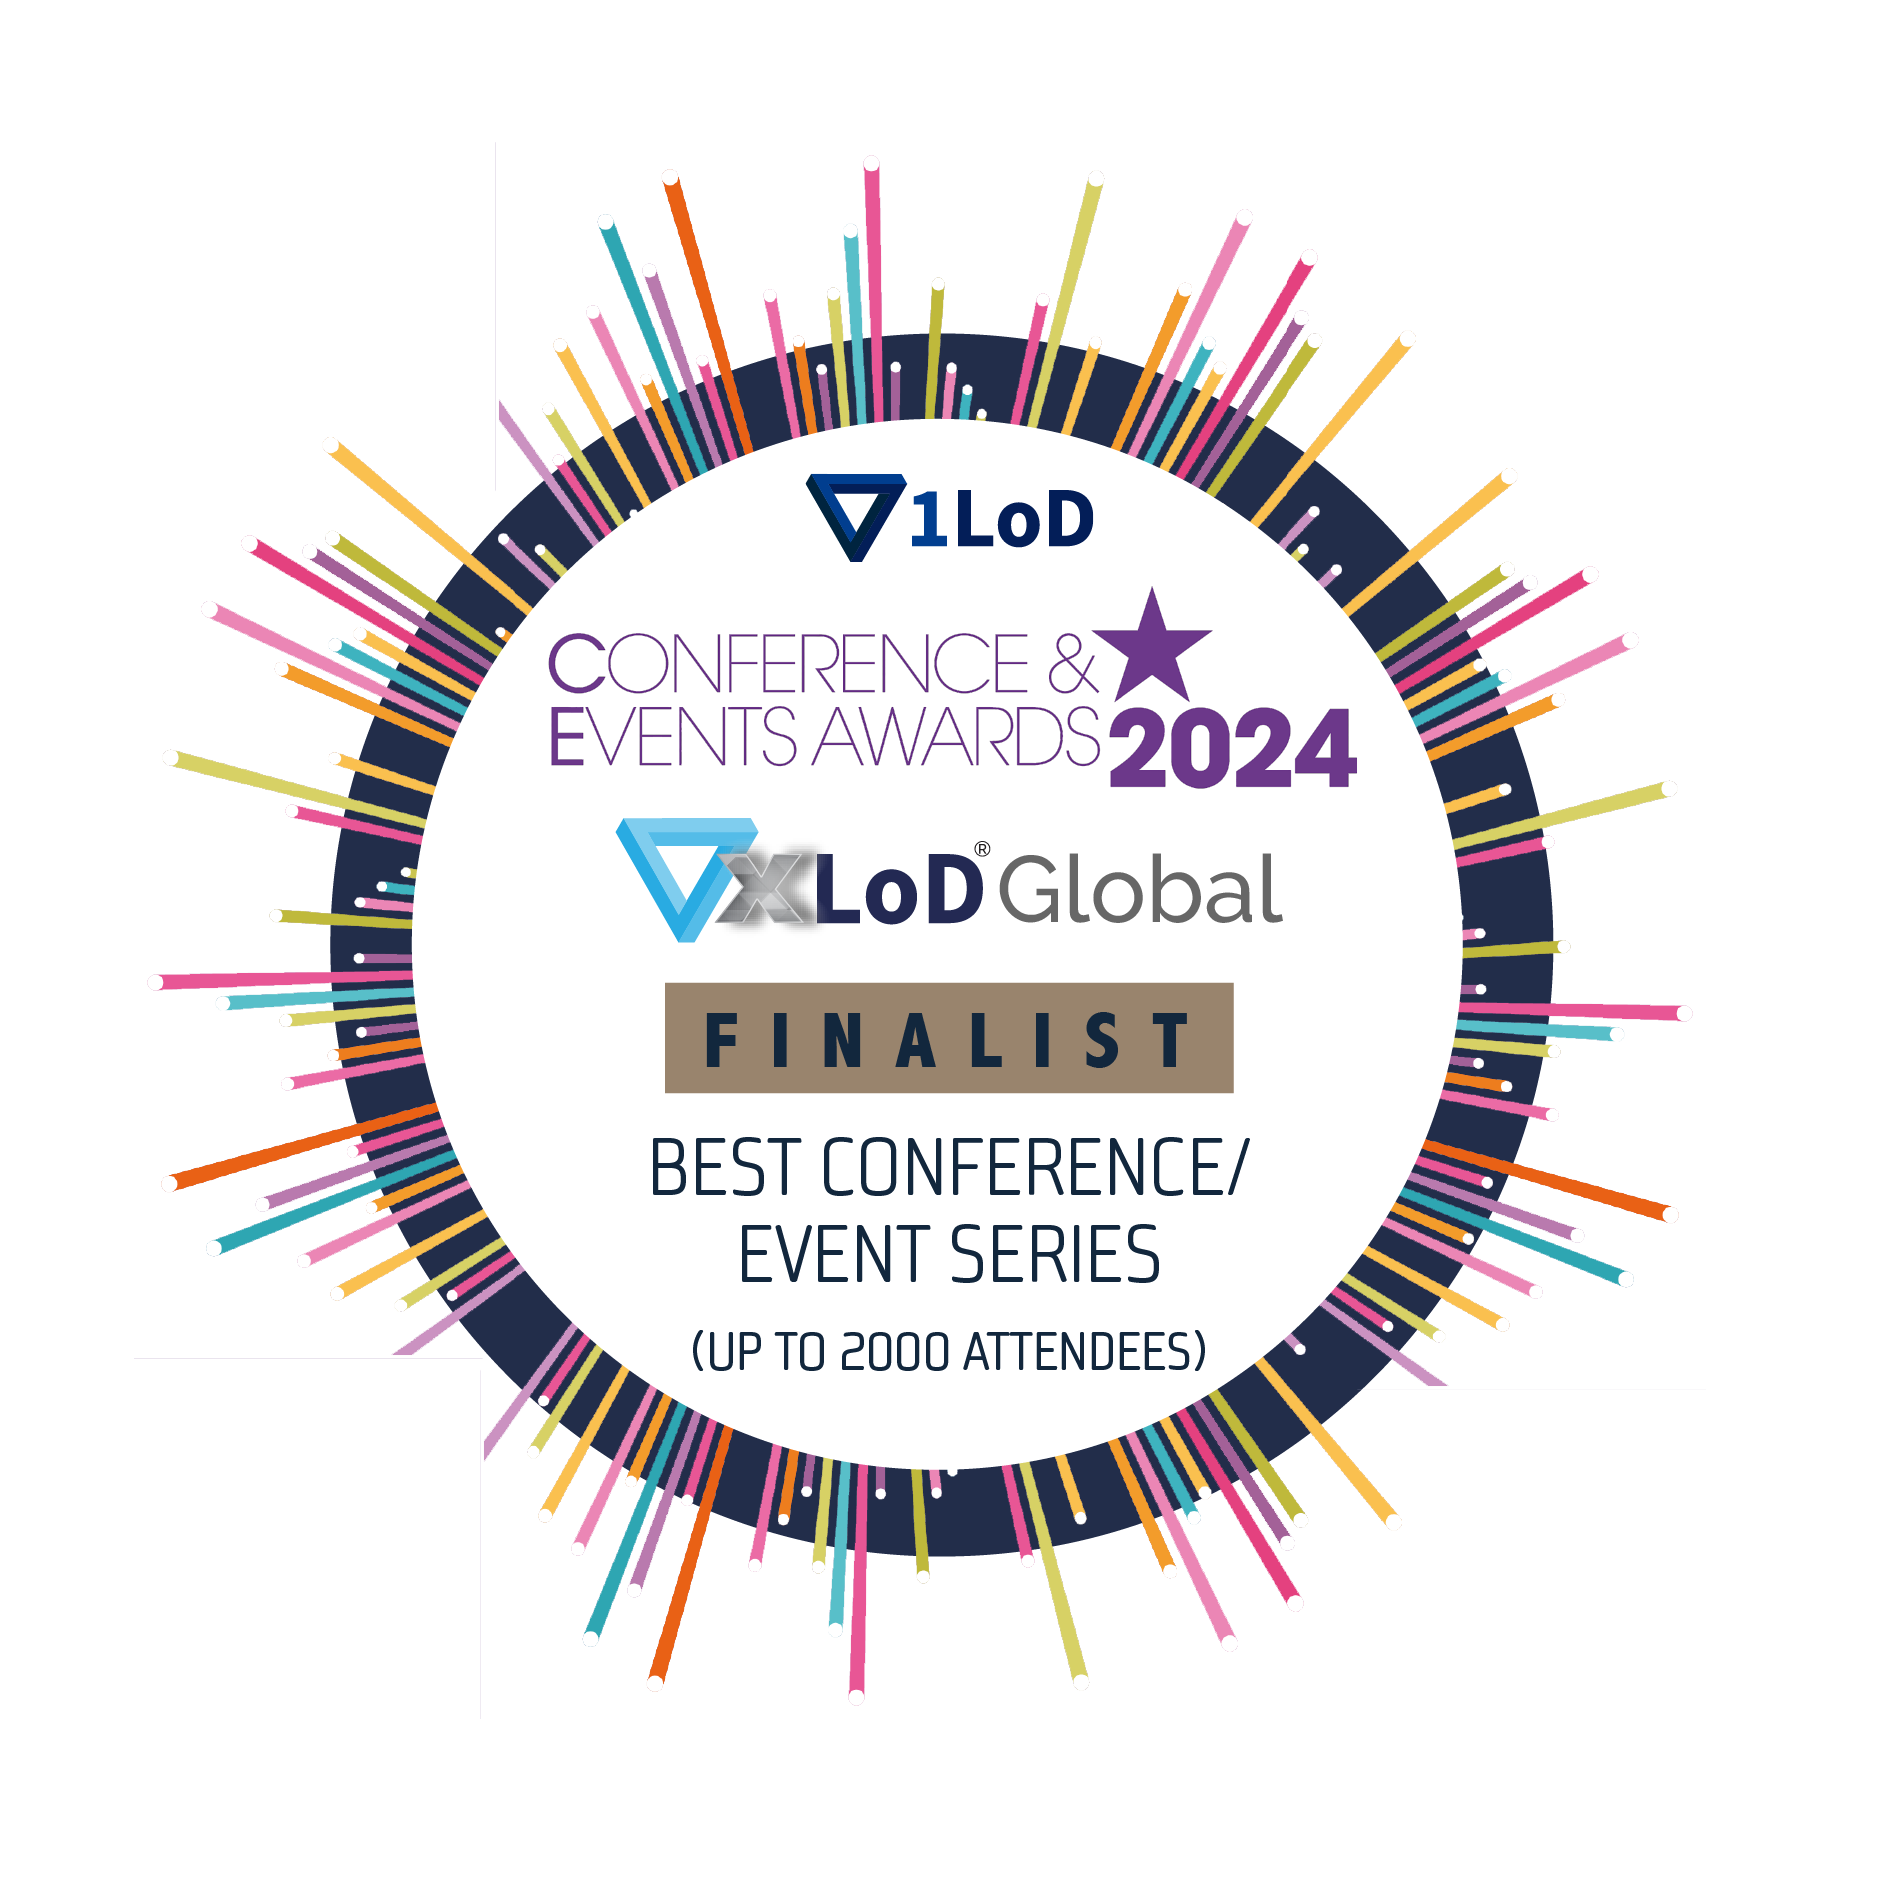 Conferences & Events Awards 2024